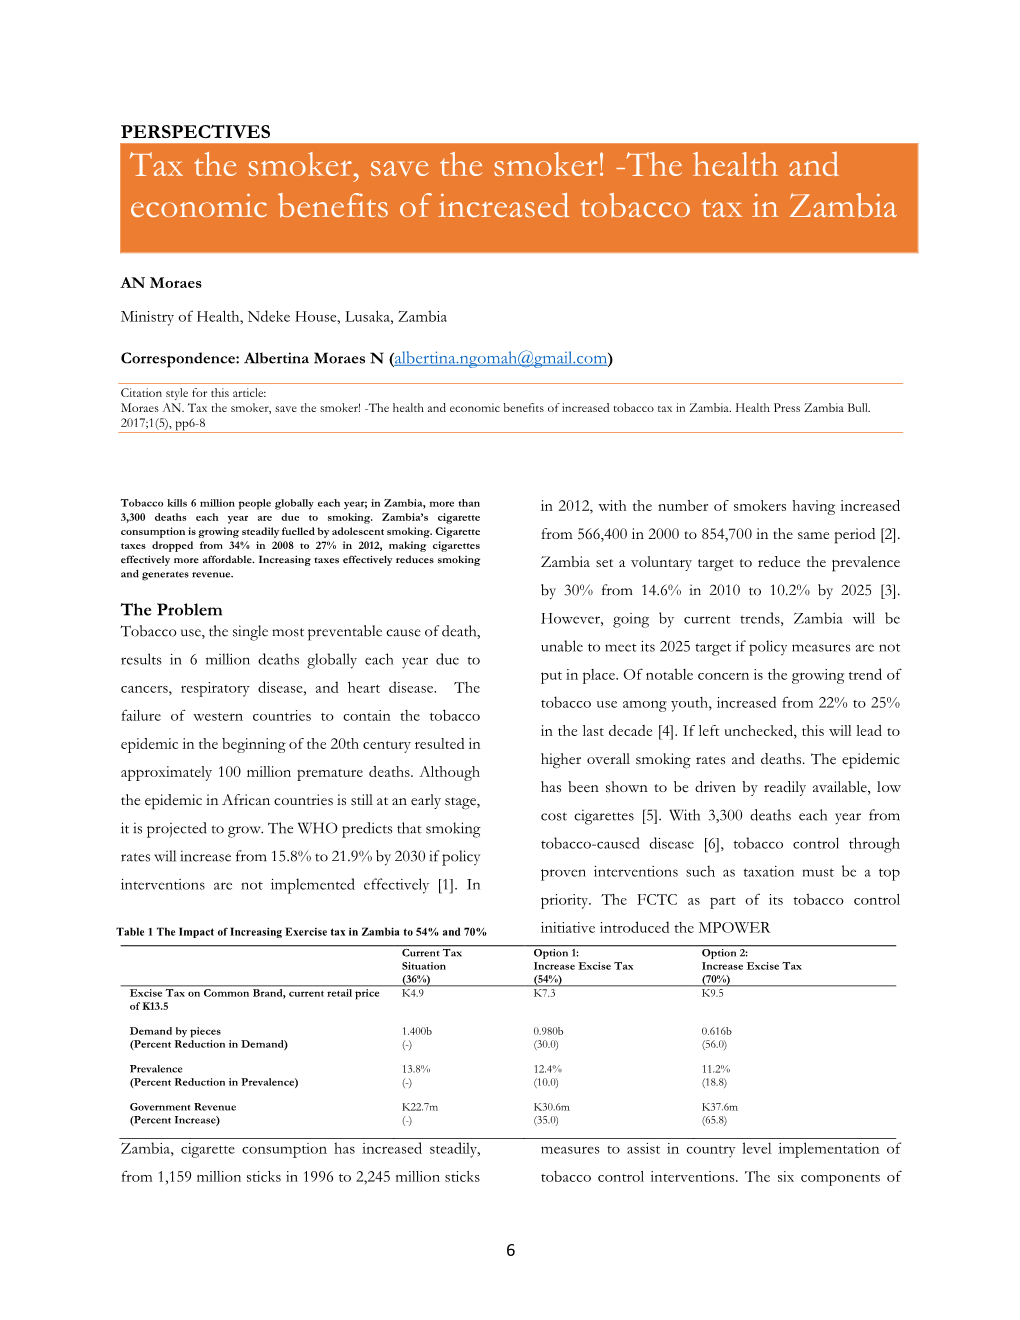 The Health and Economic Benefits of Increased Tobacco Tax in Zambia